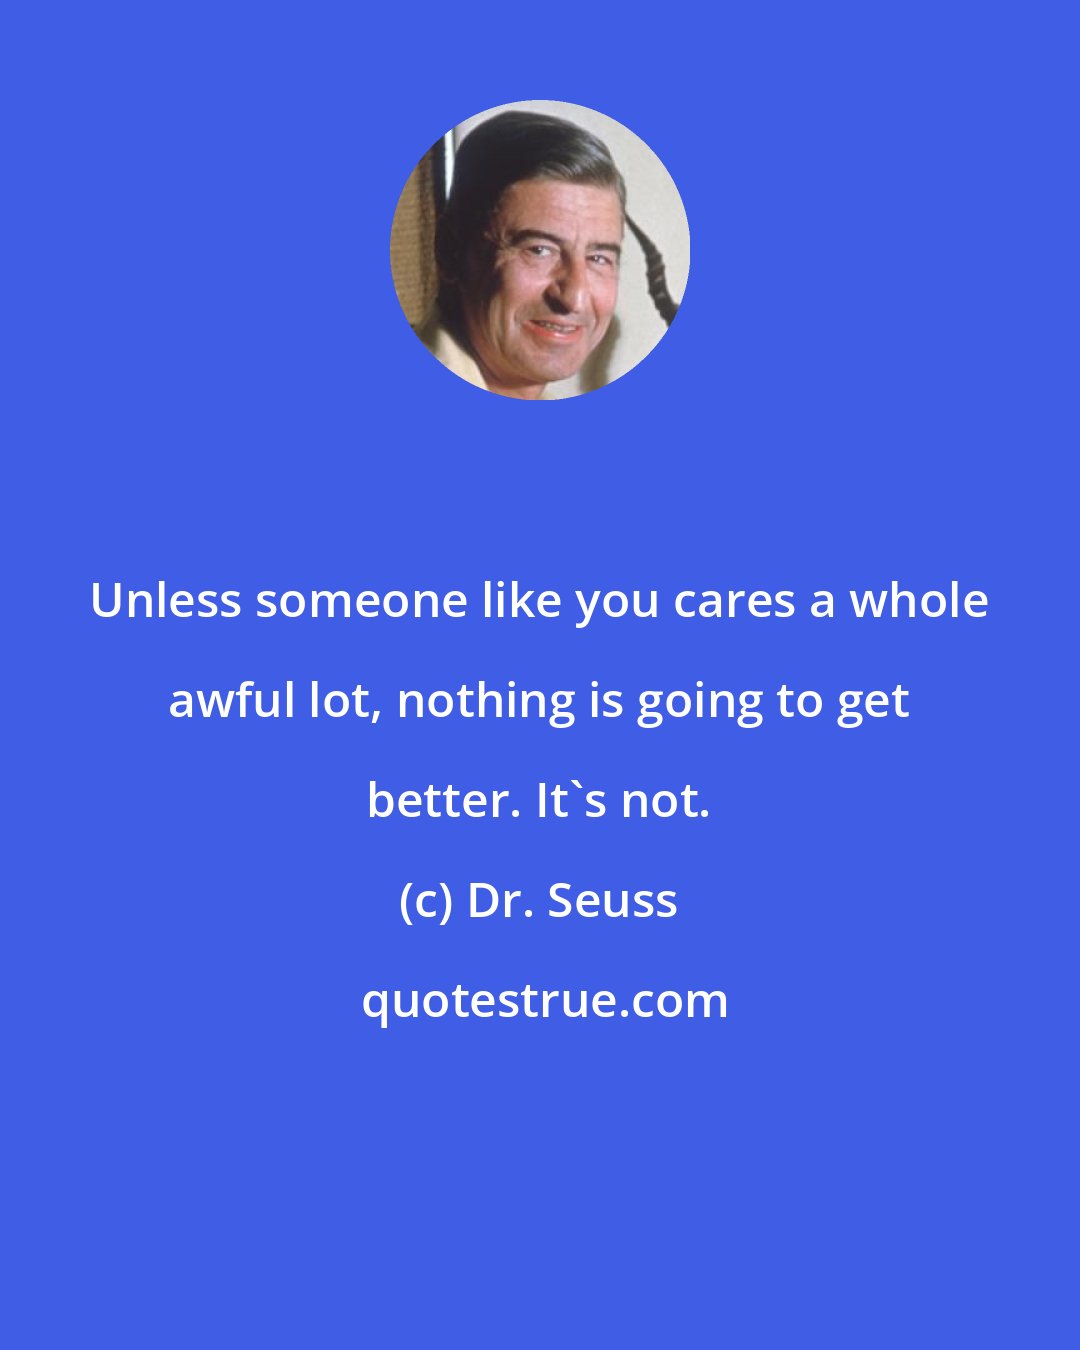 Dr. Seuss: Unless someone like you cares a whole awful lot, nothing is going to get better. It's not.